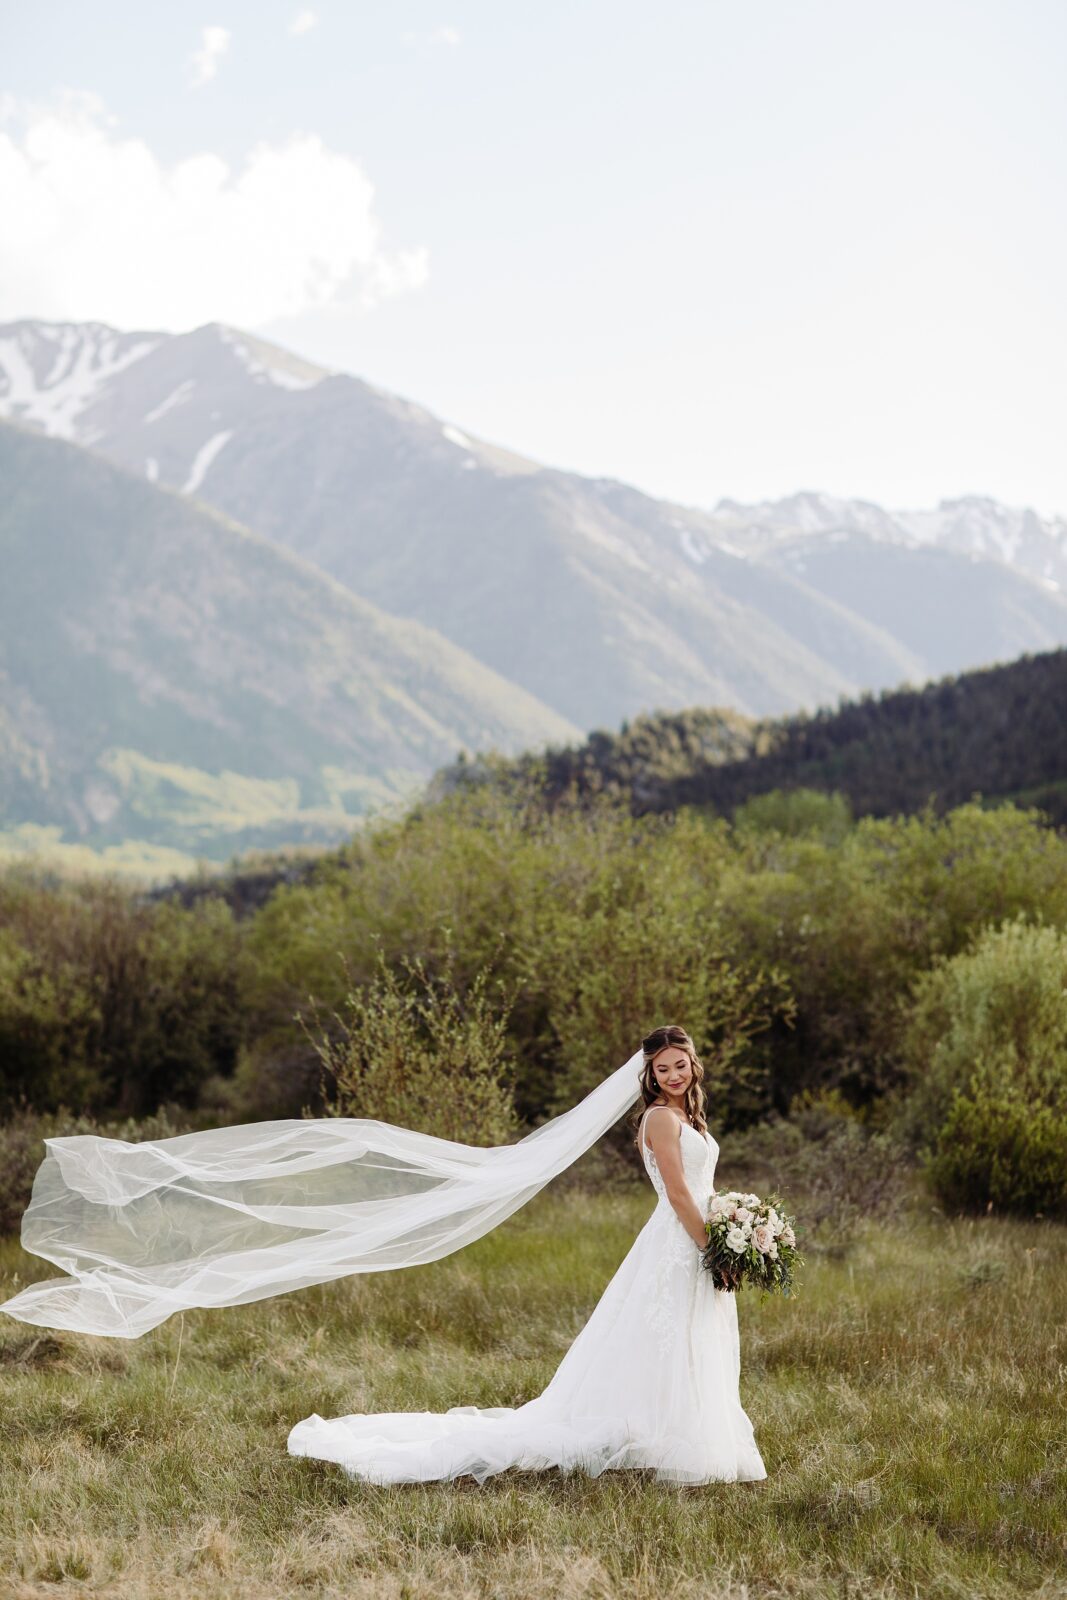 Colorado spring elopement, meadow elopement, whimsical elopement, colorado mountain elopement, colorado wildflower elopement, colorado intimate wedding, colorado wedding photographer, wedding photos in wildflowers, wedding in the meadows, Leah Goetzel Photography, elopement wedding dress inspiration, intimate wedding inspiration, Colorado lake elopement, Twin lakes elopement